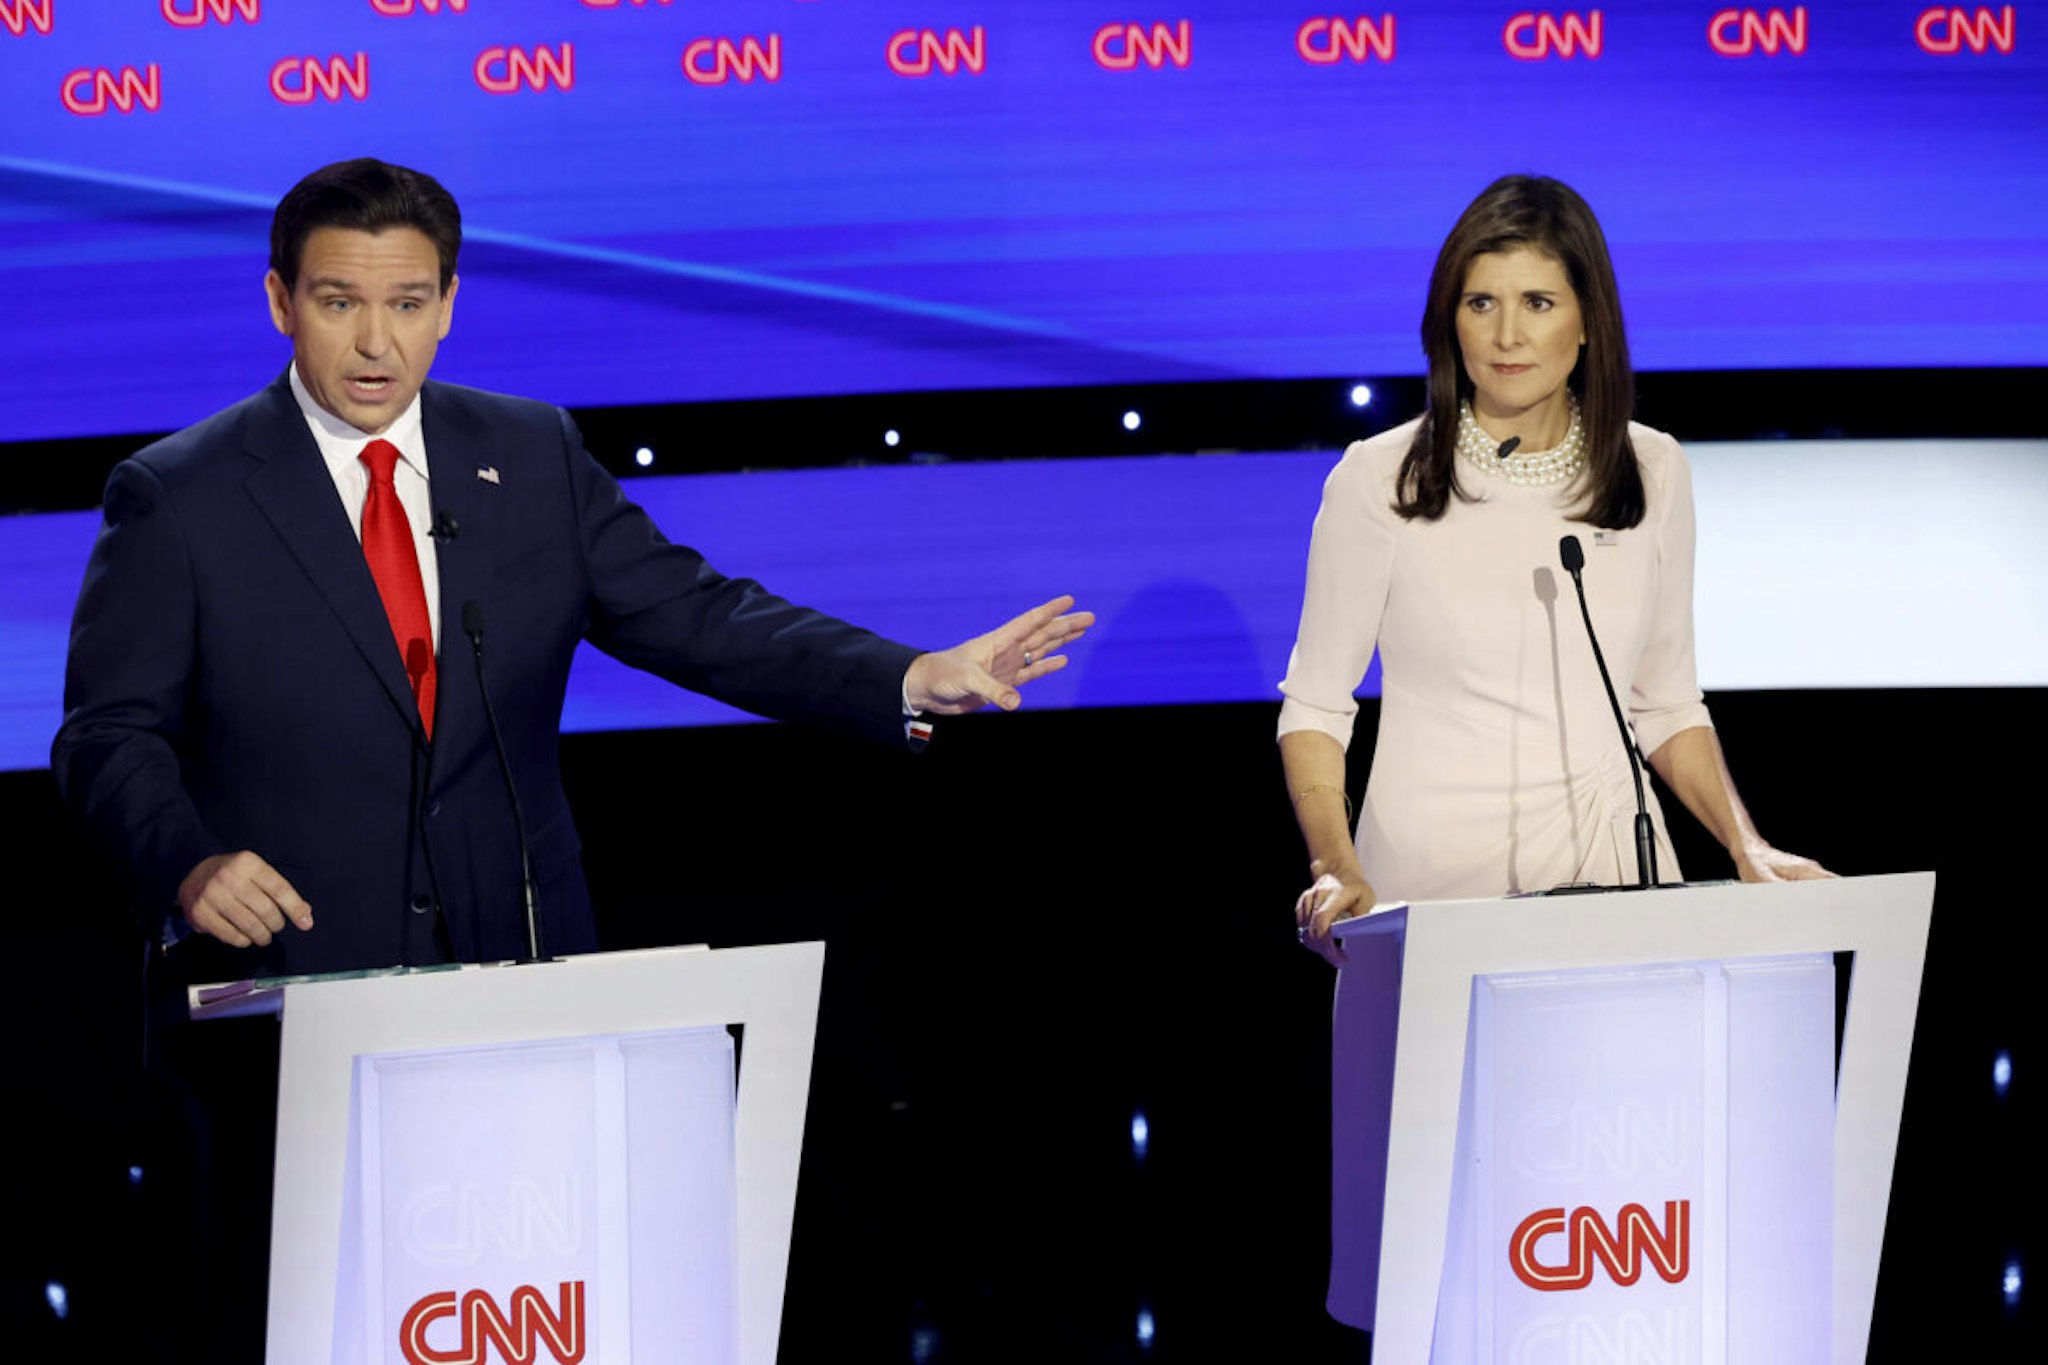 DES MOINES, IOWA - JANUARY 10: Republican presidential candidates Florida Gov. Ron DeSantis and former U.N. Ambassador Nikki Haley participate in the CNN Republican Presidential Primary Debate in Sheslow Auditorium at Drake University on January 10, 2024 in Des Moines, Iowa. DeSantis and Haley both qualified for this final debate before the Iowa caucuses, while former President Donald Trump declined to participate and instead held a simultaneous town hall event live on FOX News.